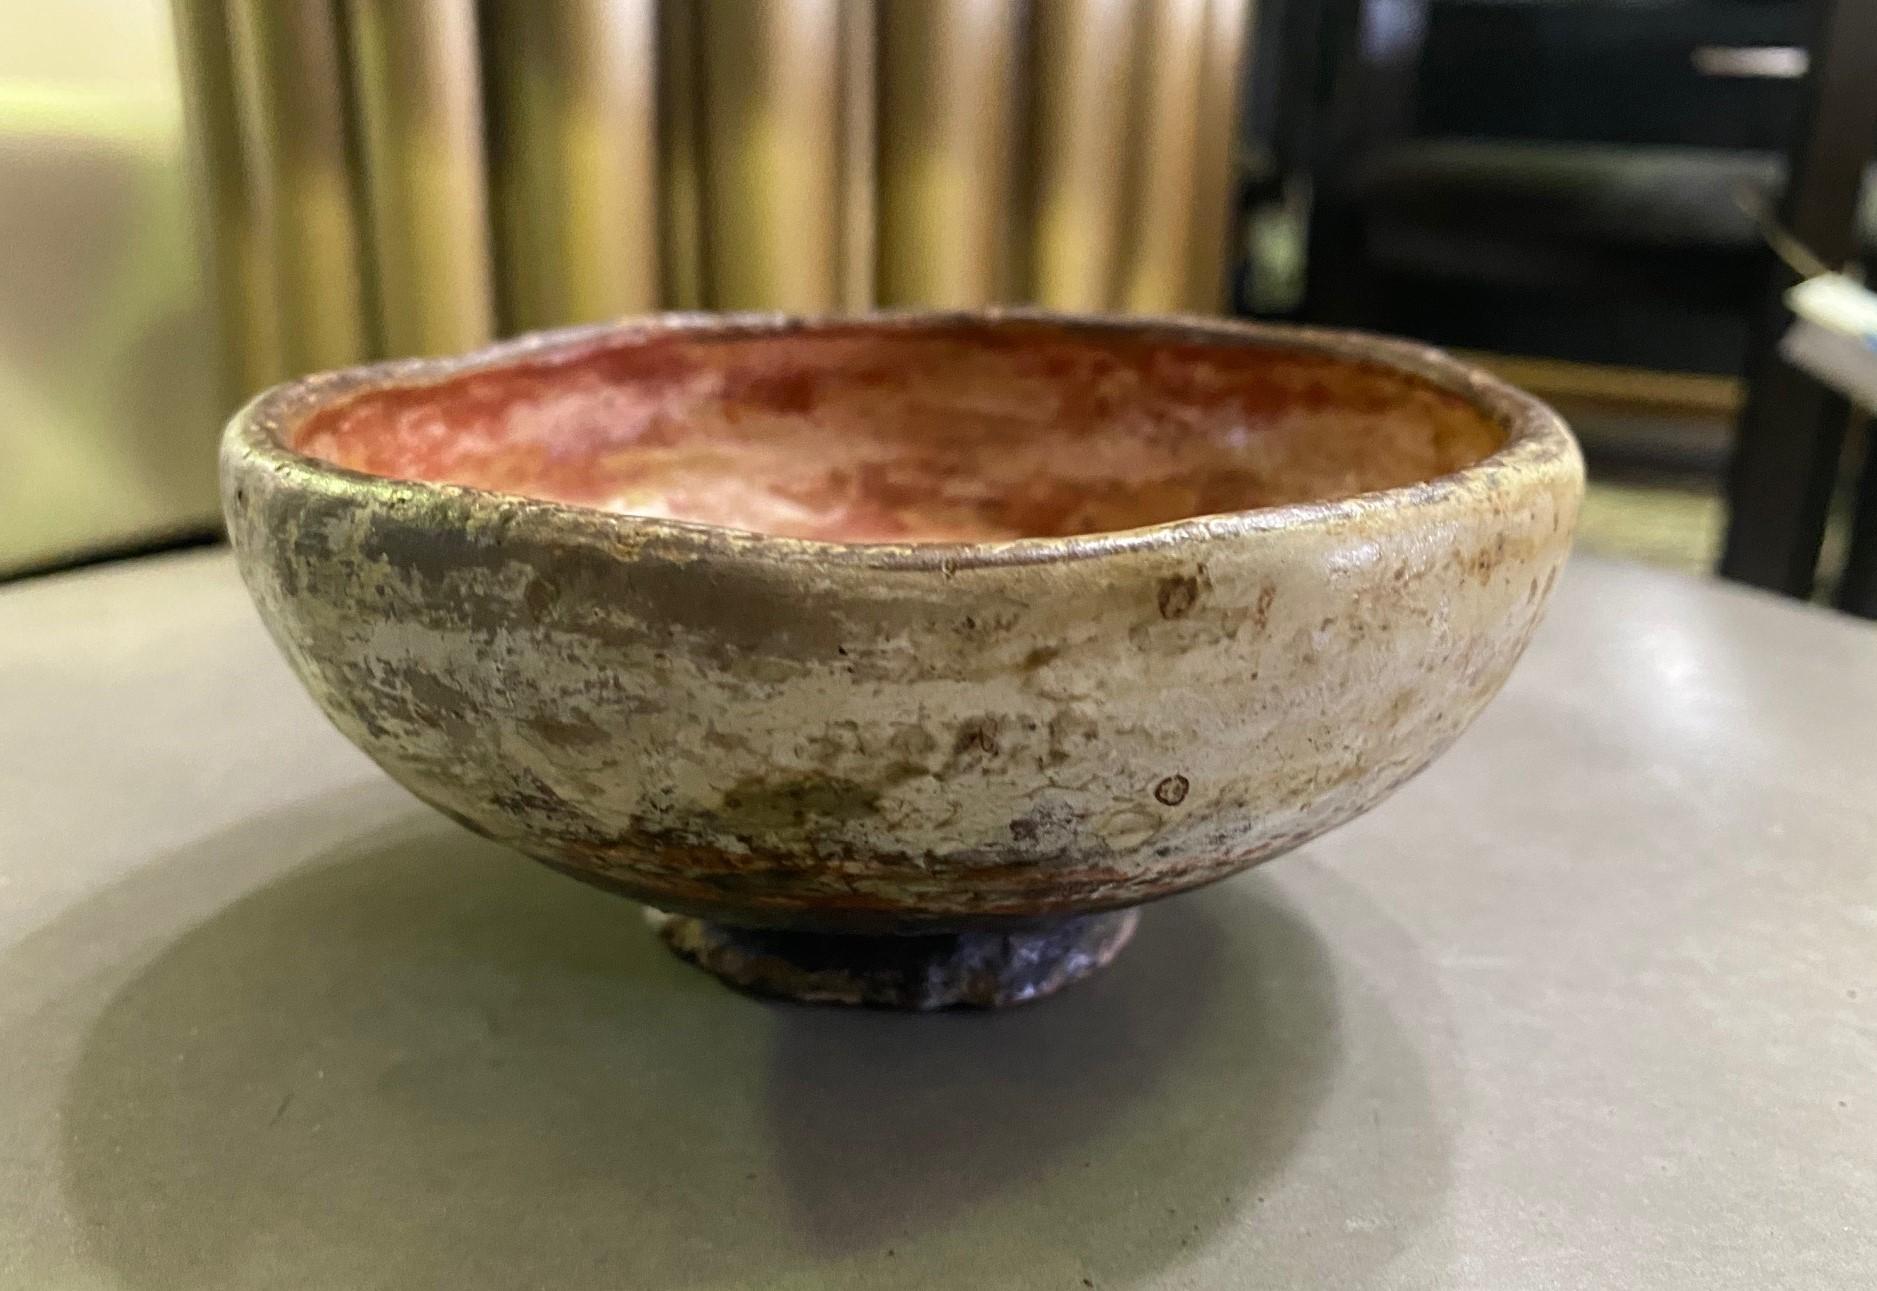 A wonderful gem. Perhaps Southwestern Pueblo pottery. Came from a collection of other Native American objects - pottery, blankets, rugs, etc.

The small bowl is clearly well made and wonderfully decorated, textured and colored with red pigment,